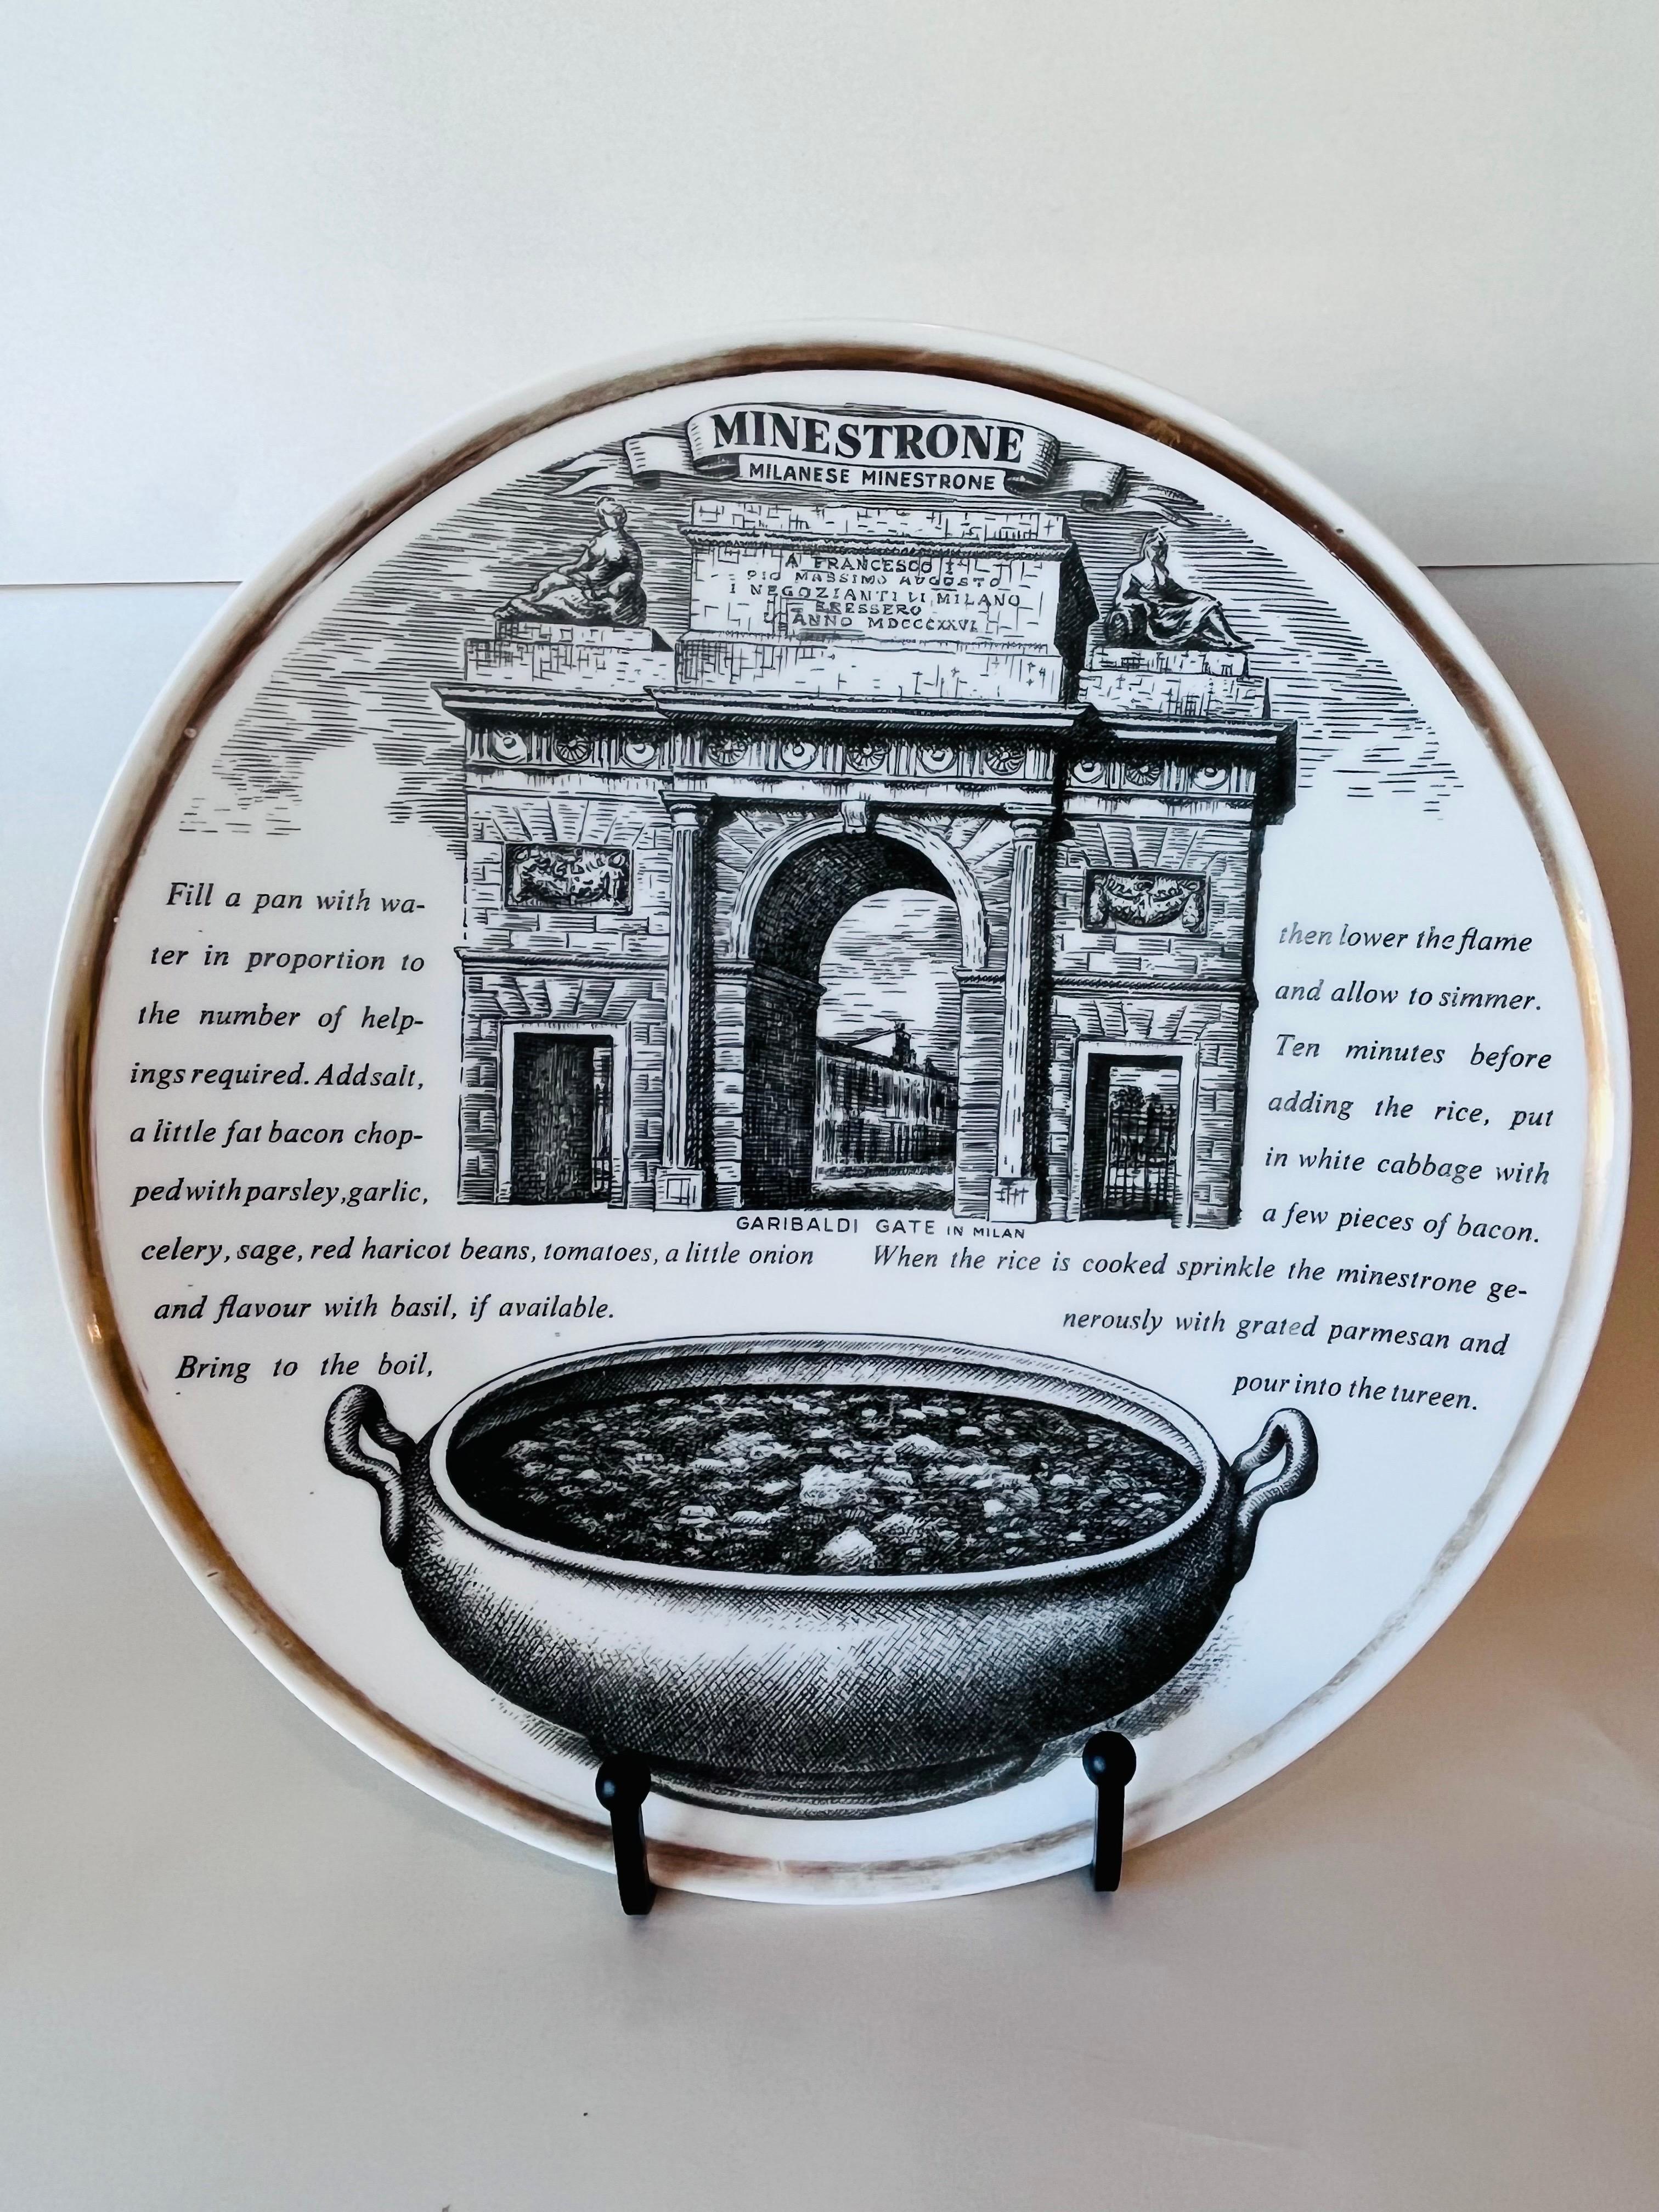 A set of three recipe plates by Piero Fornasetti. So, let's eat! Three different recipes from three different regions of Italy. Gold rimmed. Black printed. Delicious. I don't know about you, but the kitchen is absolutely a favorite room! Seriously,